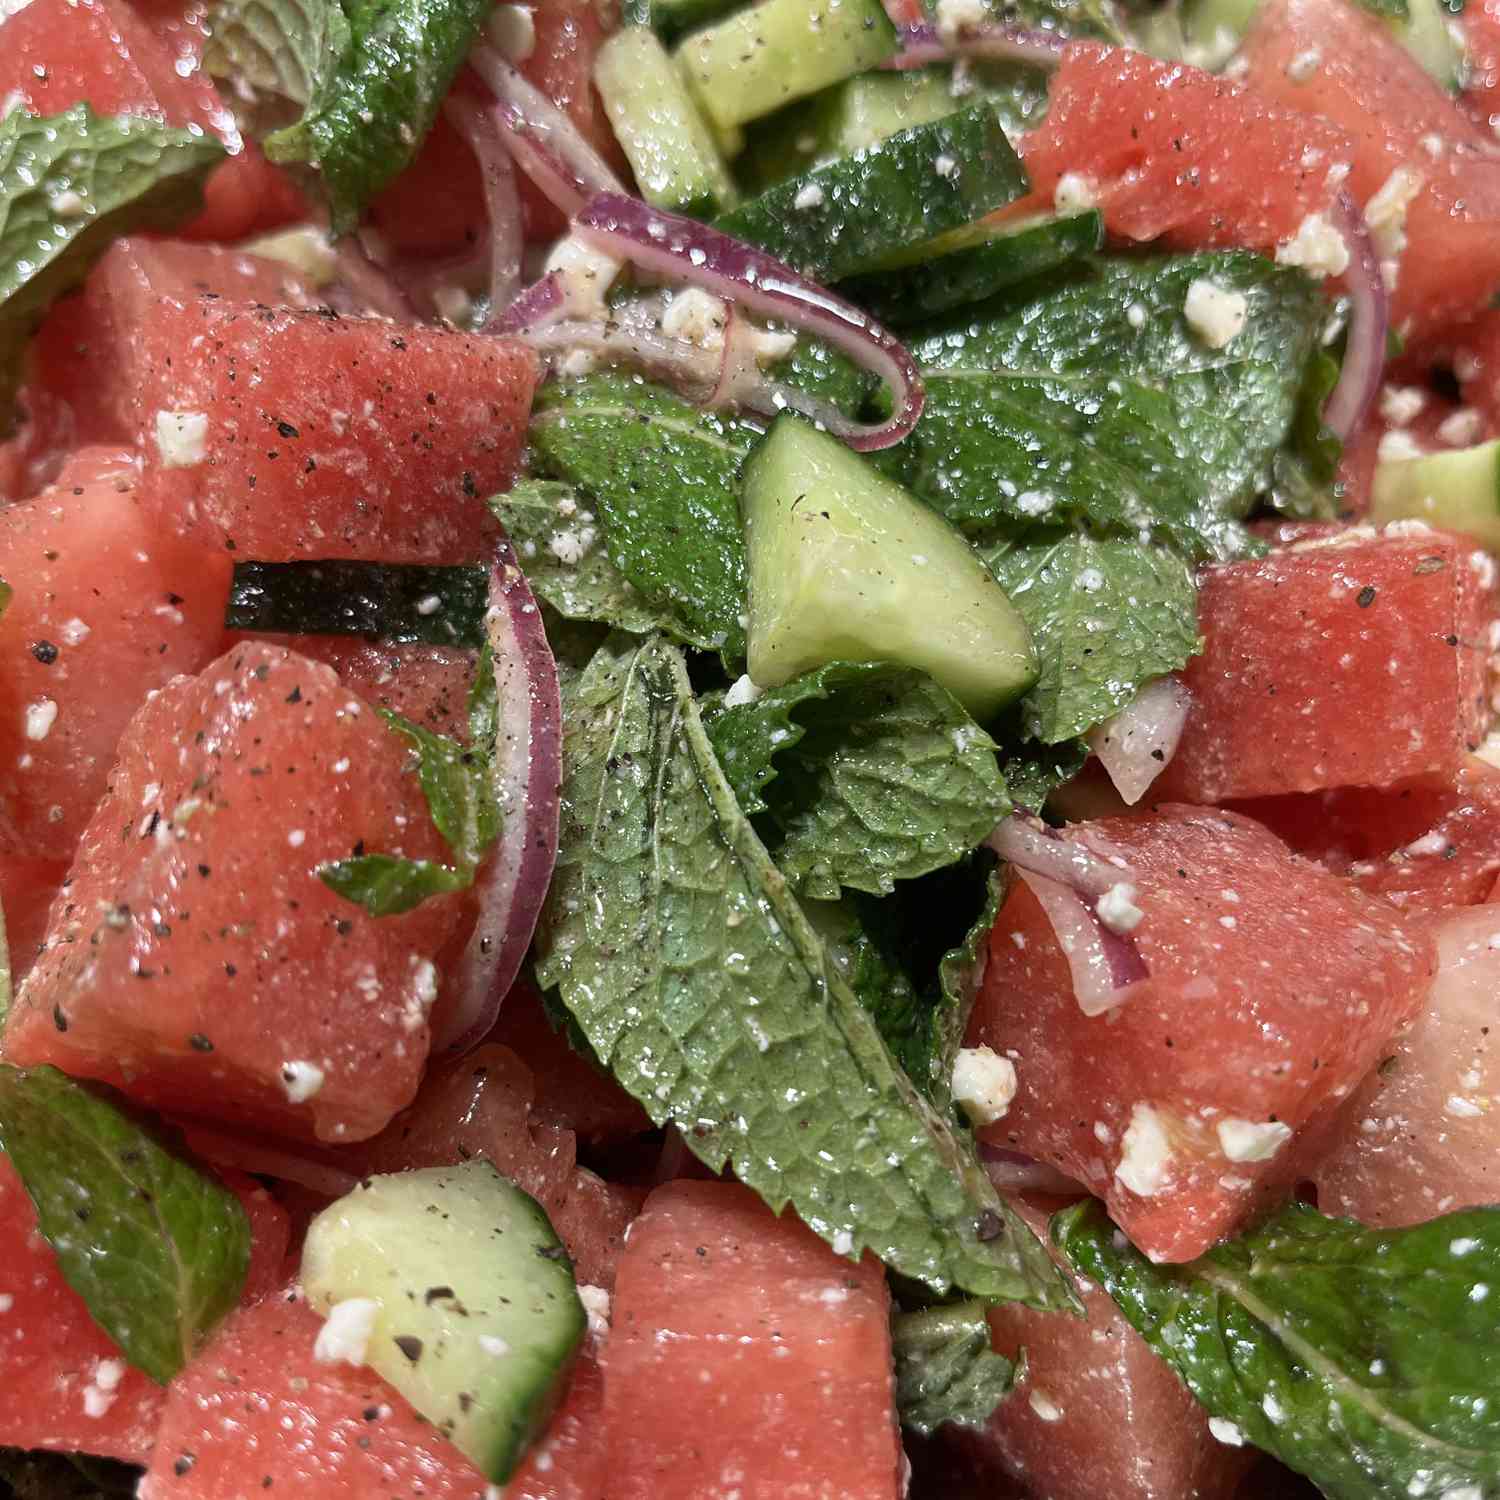 Close-up of watermelon salad with cubed watermelon, whole mint leaves, sliced red onion, and chopped cucumber